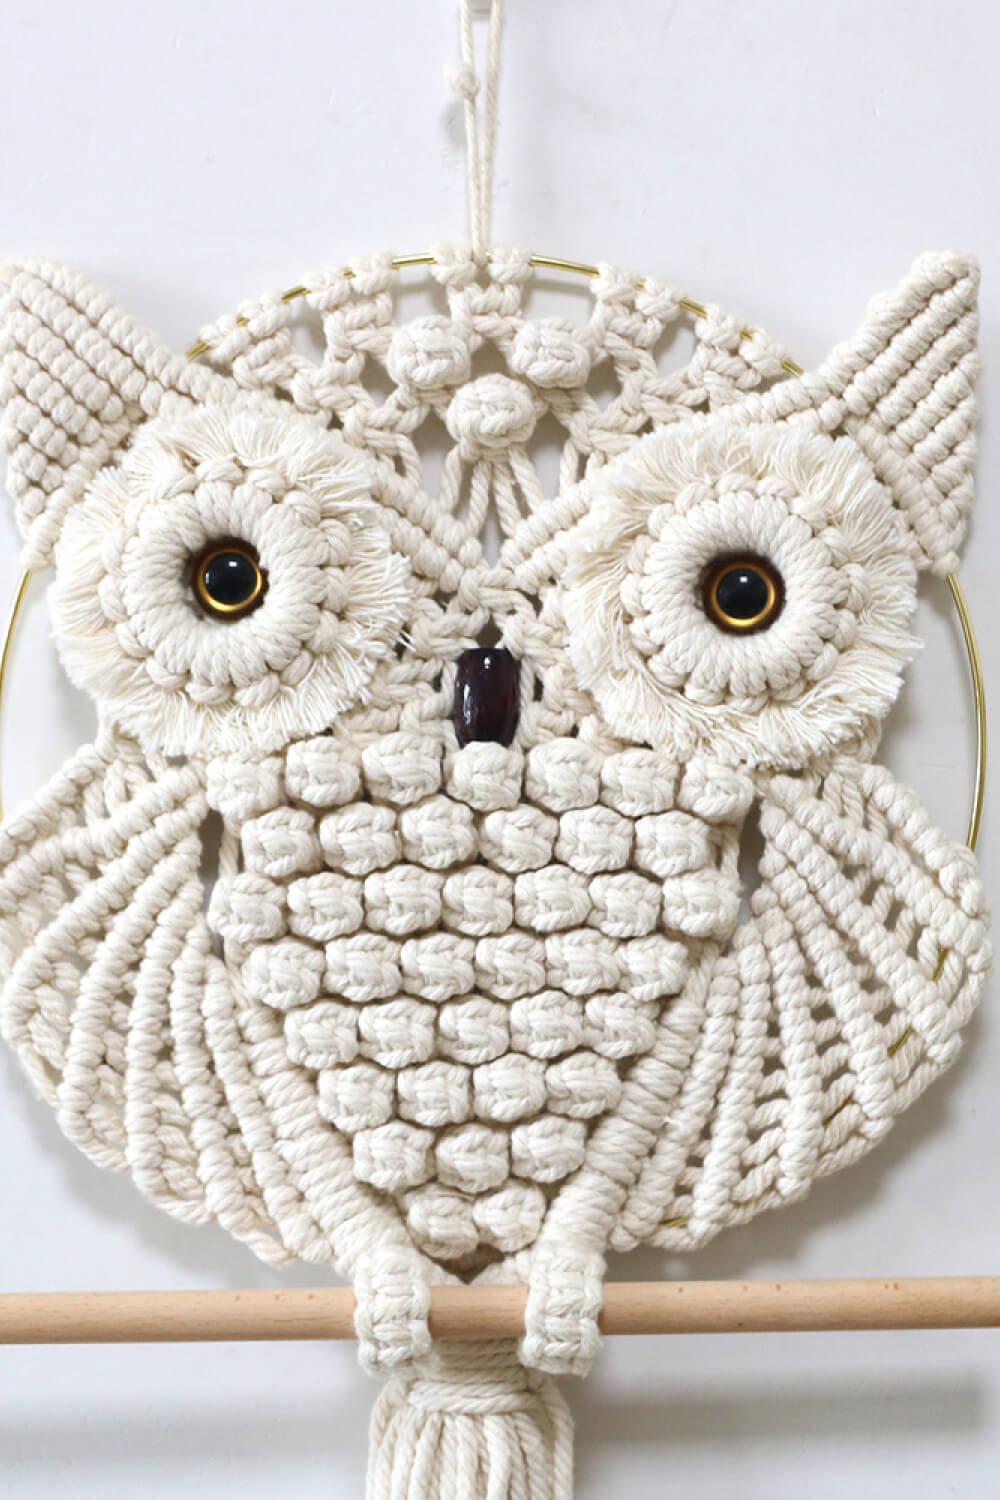 Hand-Woven Owl Macrame Wall Hanging BLUE ZONE PLANET